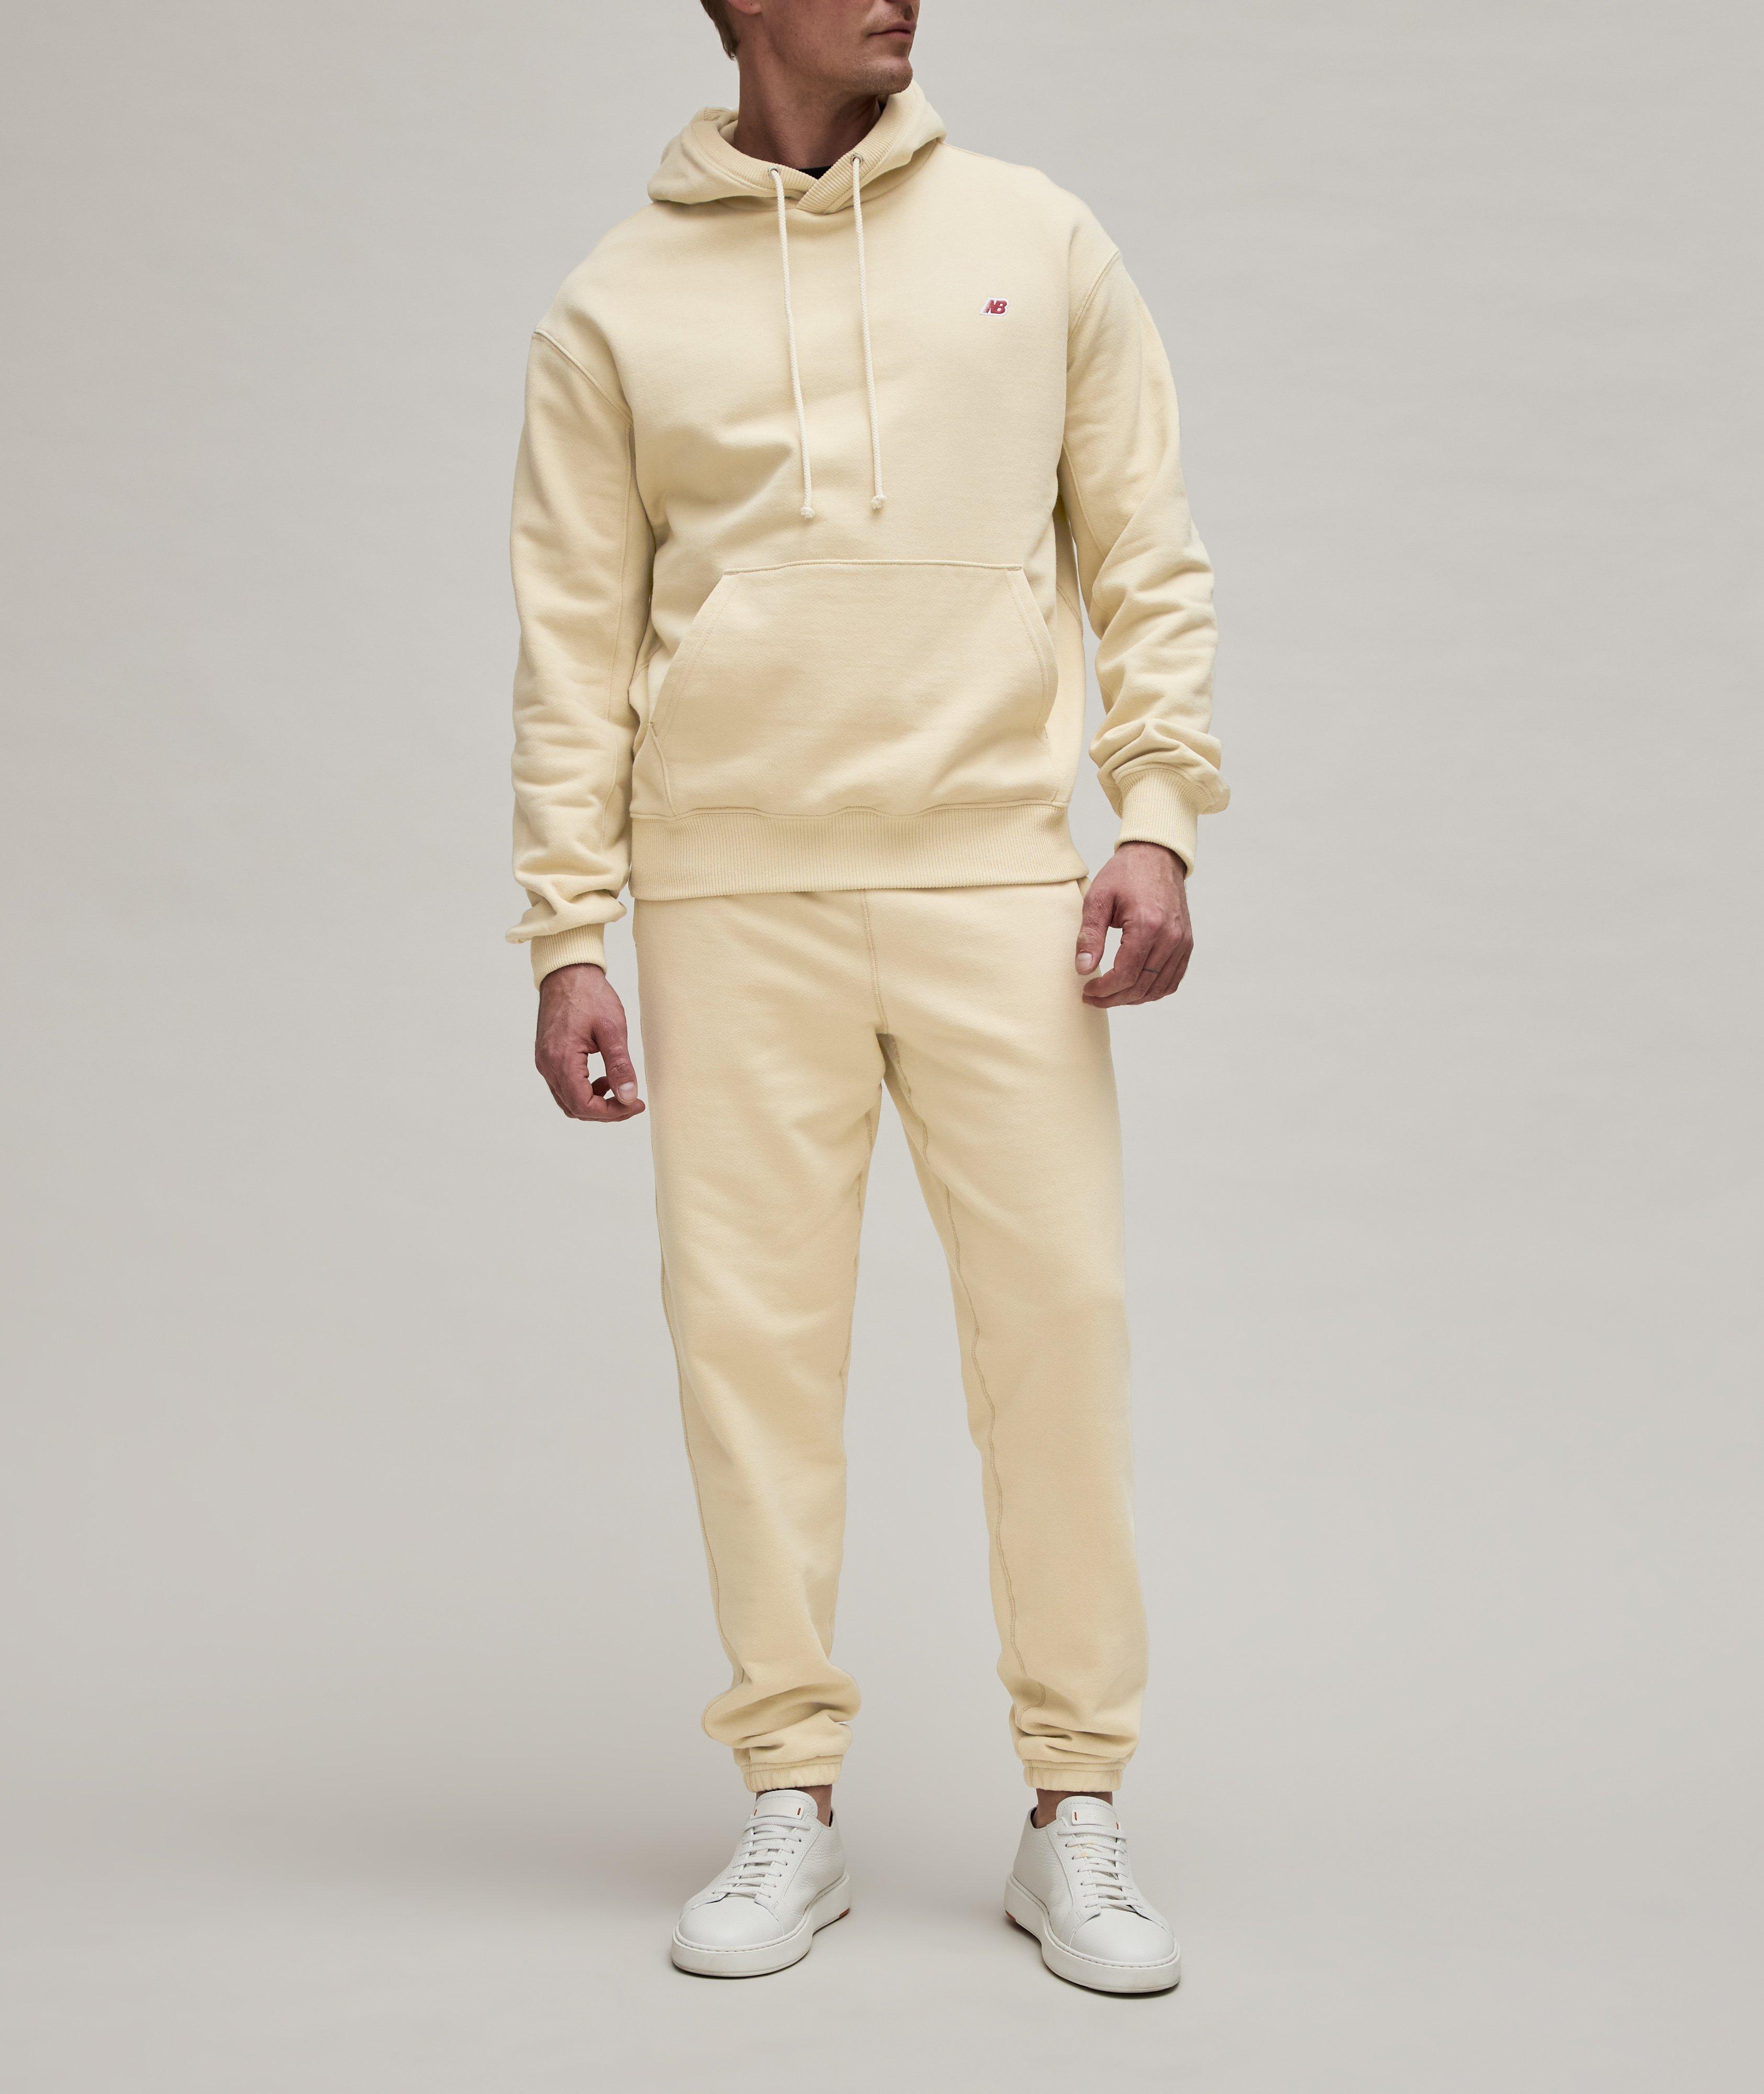 French Terry Cotton Sweatpants image 5